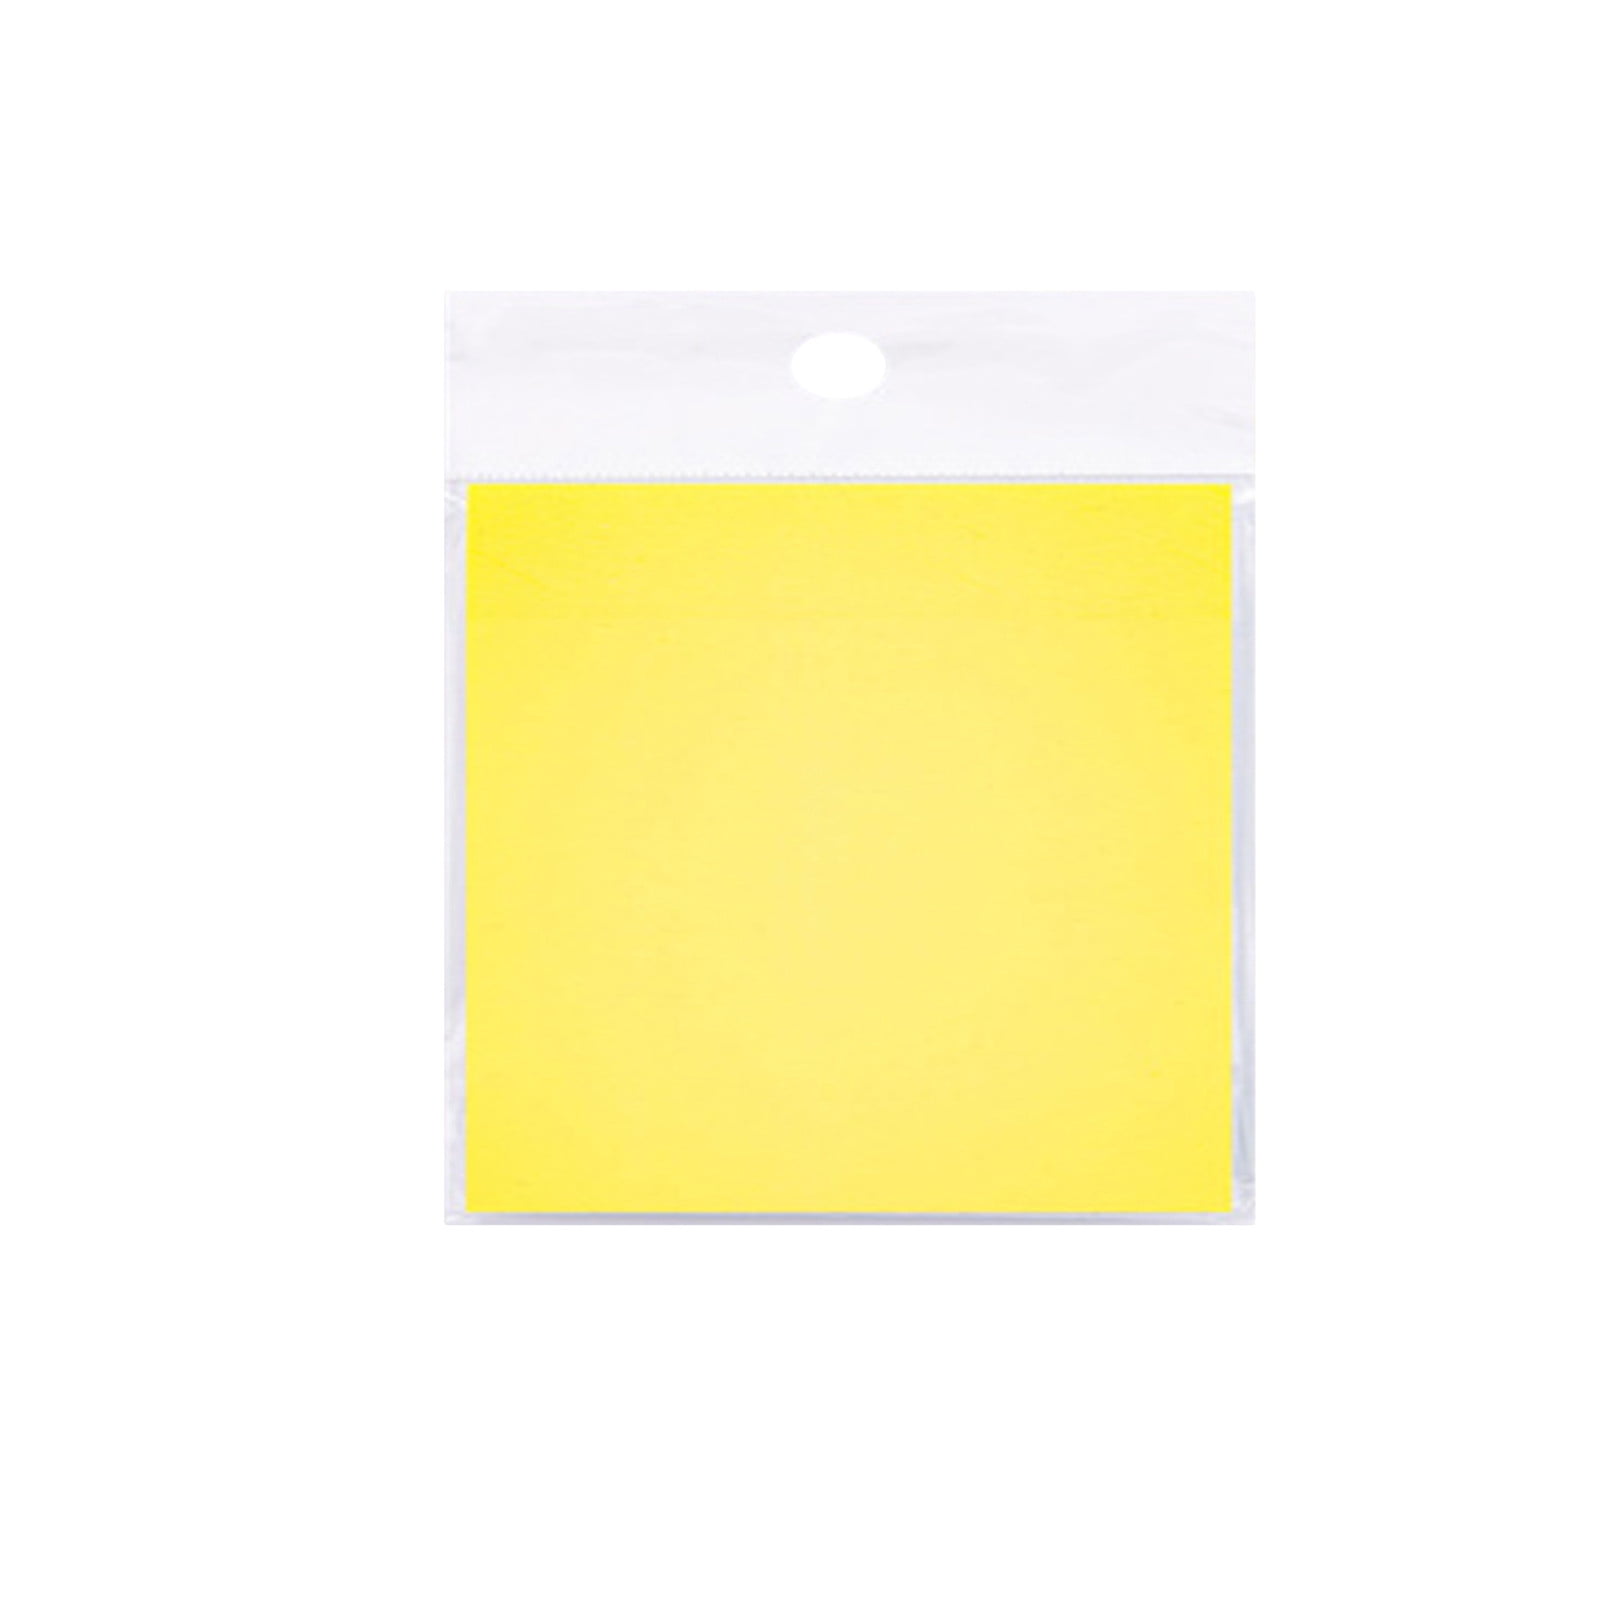 Yyeselk 50 Sheets Sticky Notes Transparent Transparent Paper Clear Sticky  Notes Memo Self-Adhesive Notebook Notepaper Insert For School Office Memo  Students 